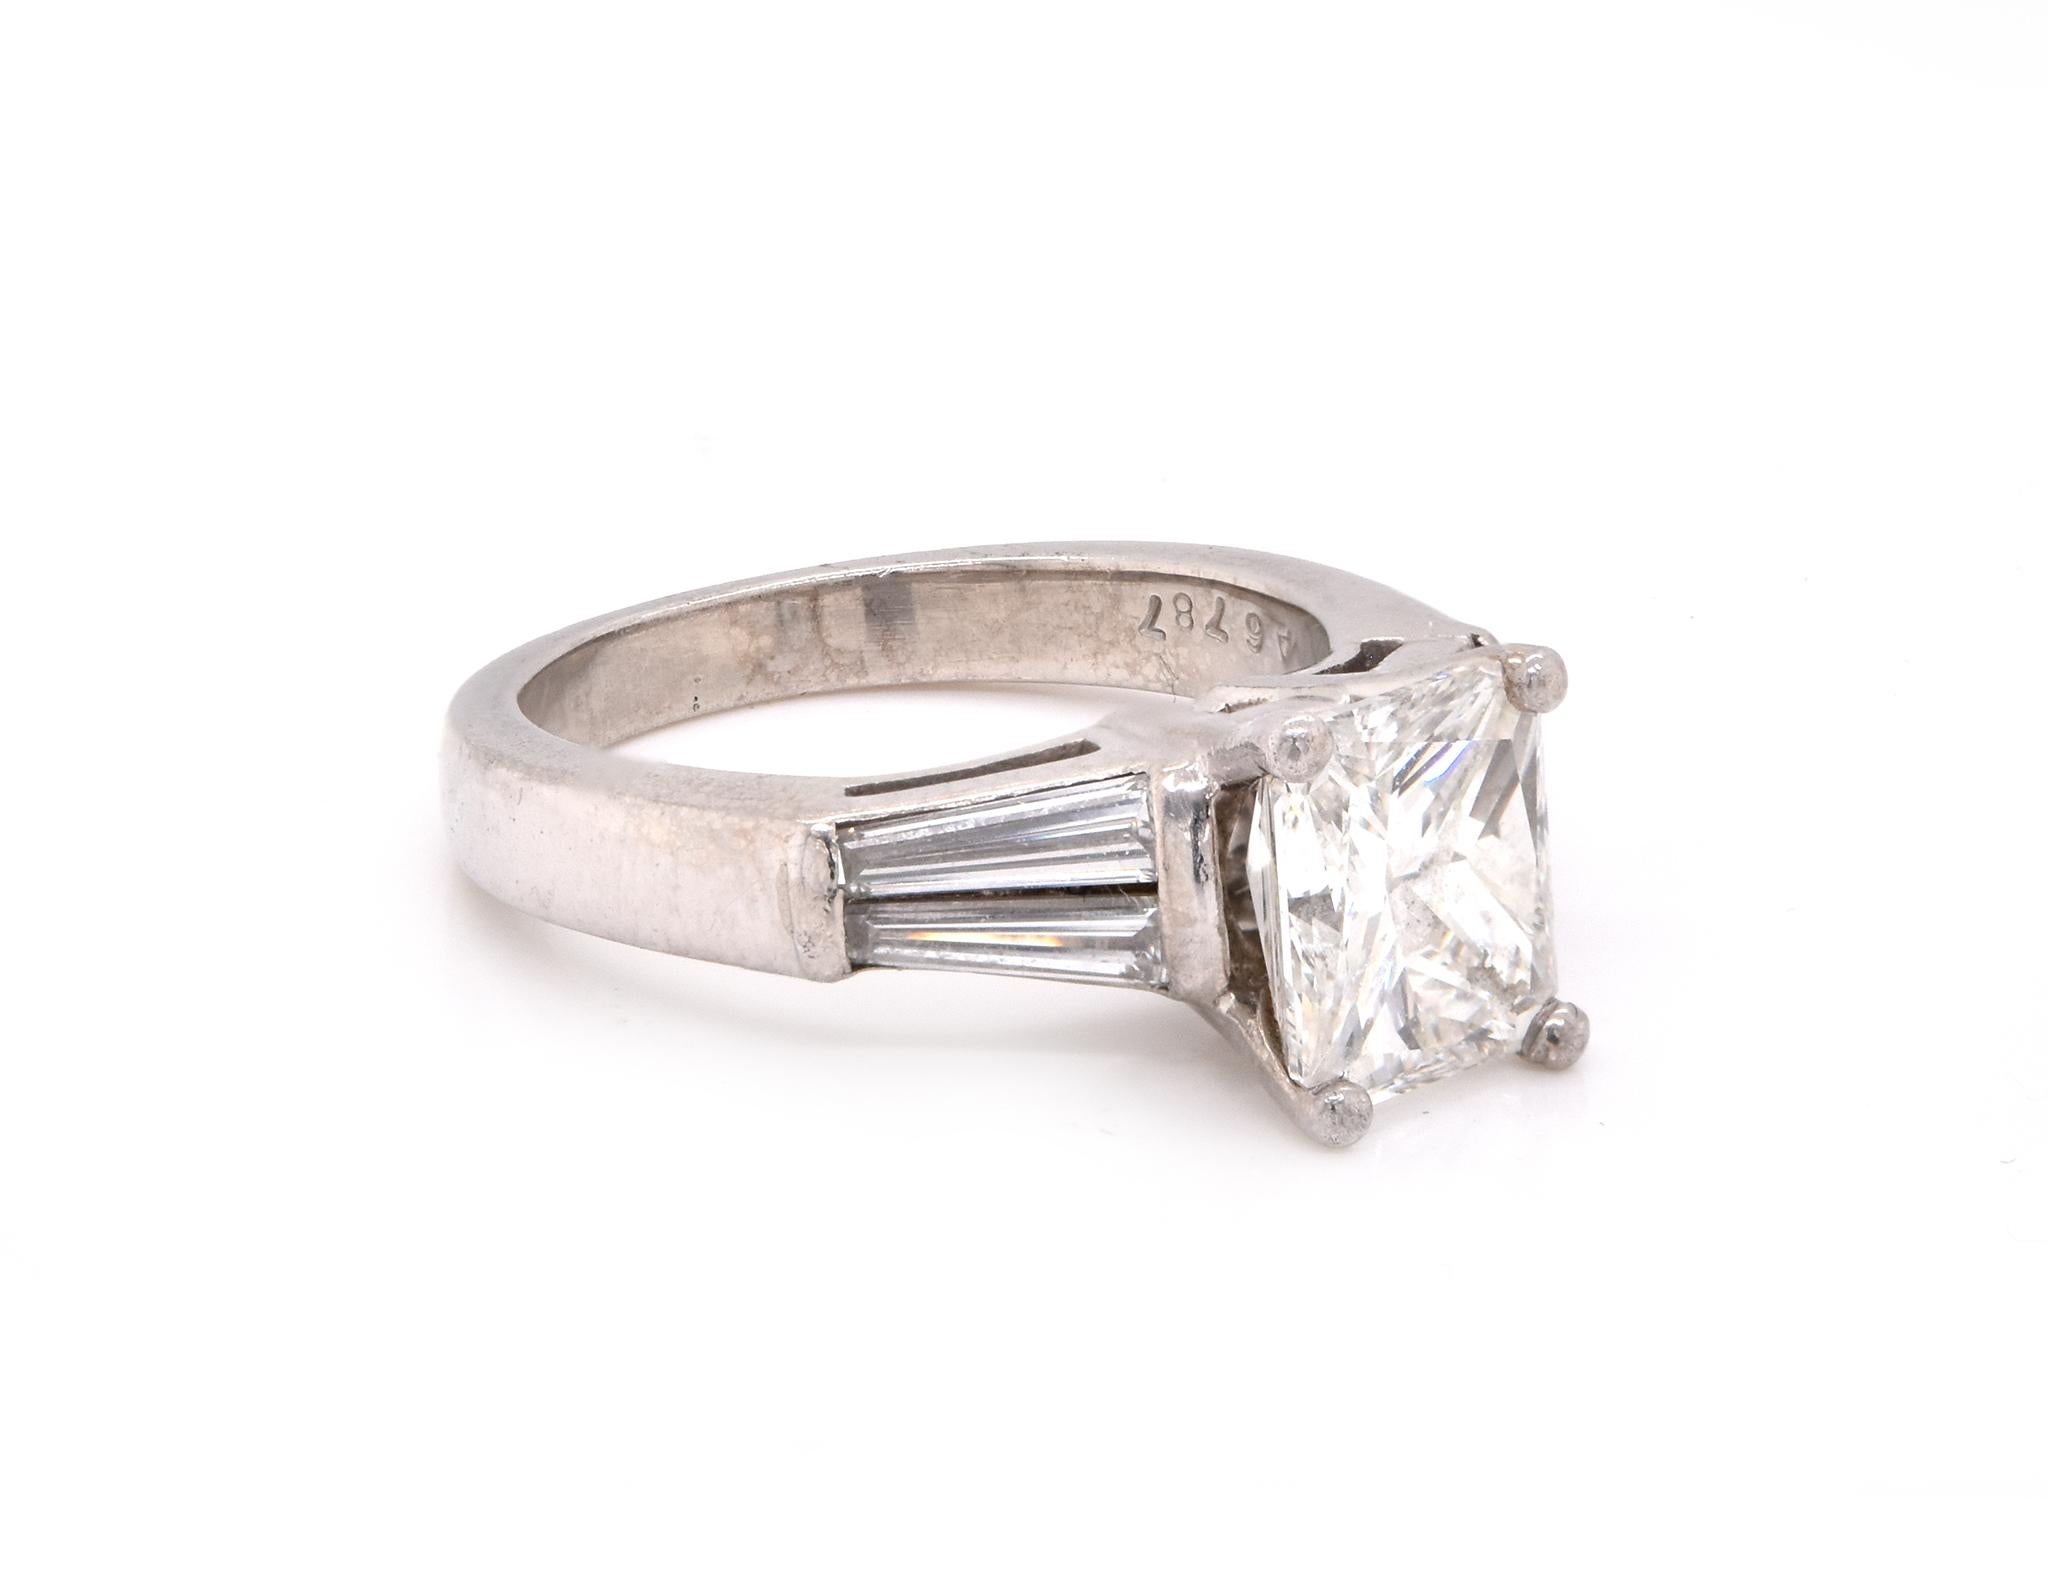 Material: platinum
Center Diamond: 1 radiant cut = 2.25ct
Color: I
Clarity: VS2
Diamond: 4 baguette cut = .50cttw
Color: I
Clarity: VS2
Ring Size: 5 (please allow up to 2 additional business days for sizing requests)
Dimensions: ring shank measures